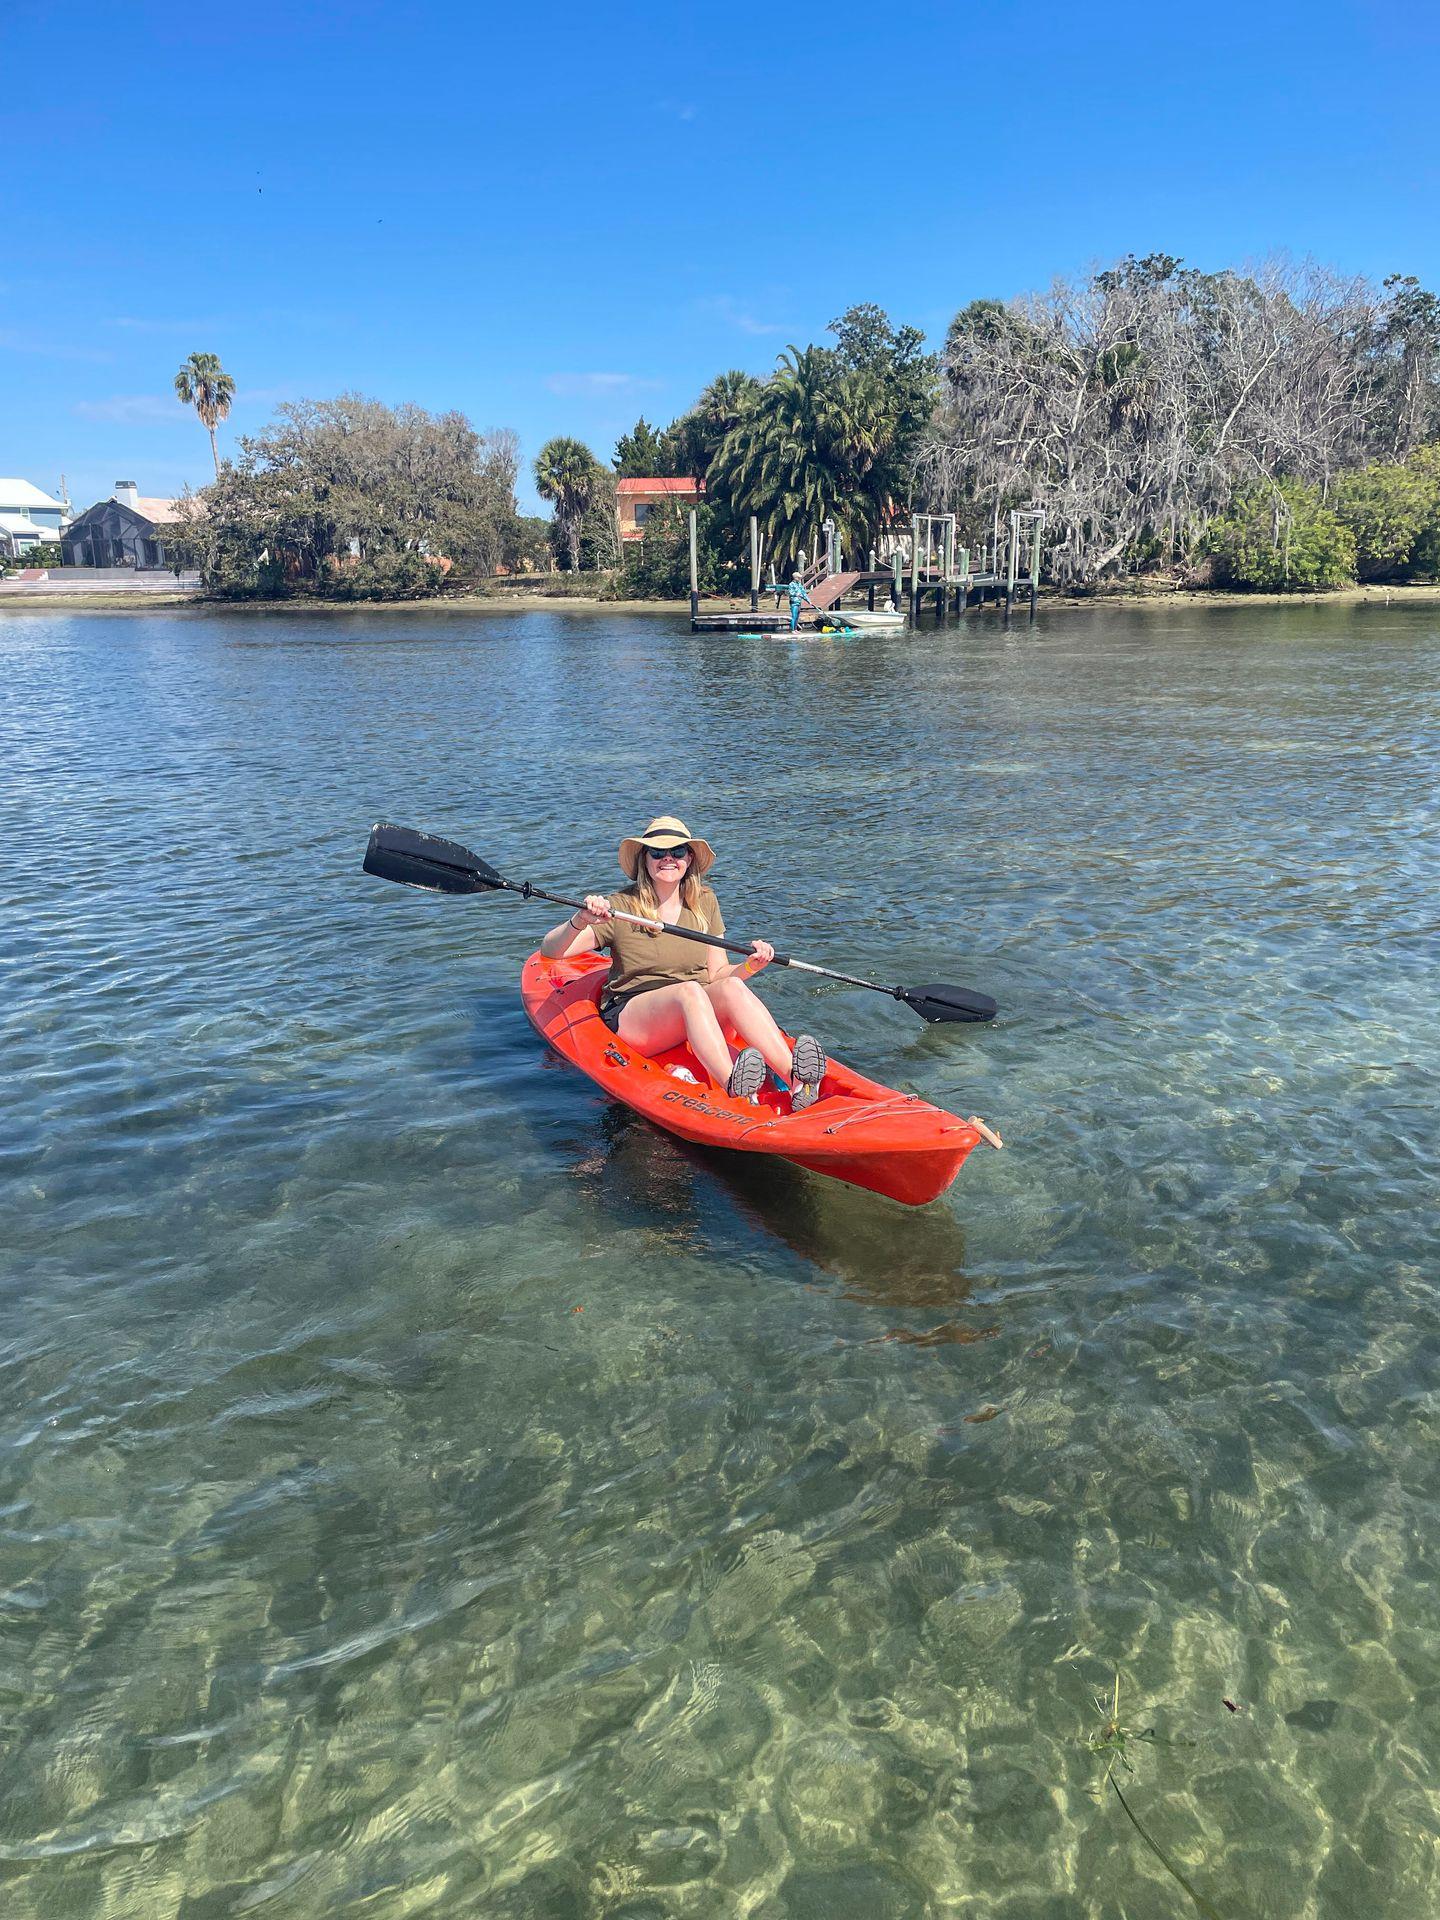 Lydia sitting on a red kayak in Crystal River.